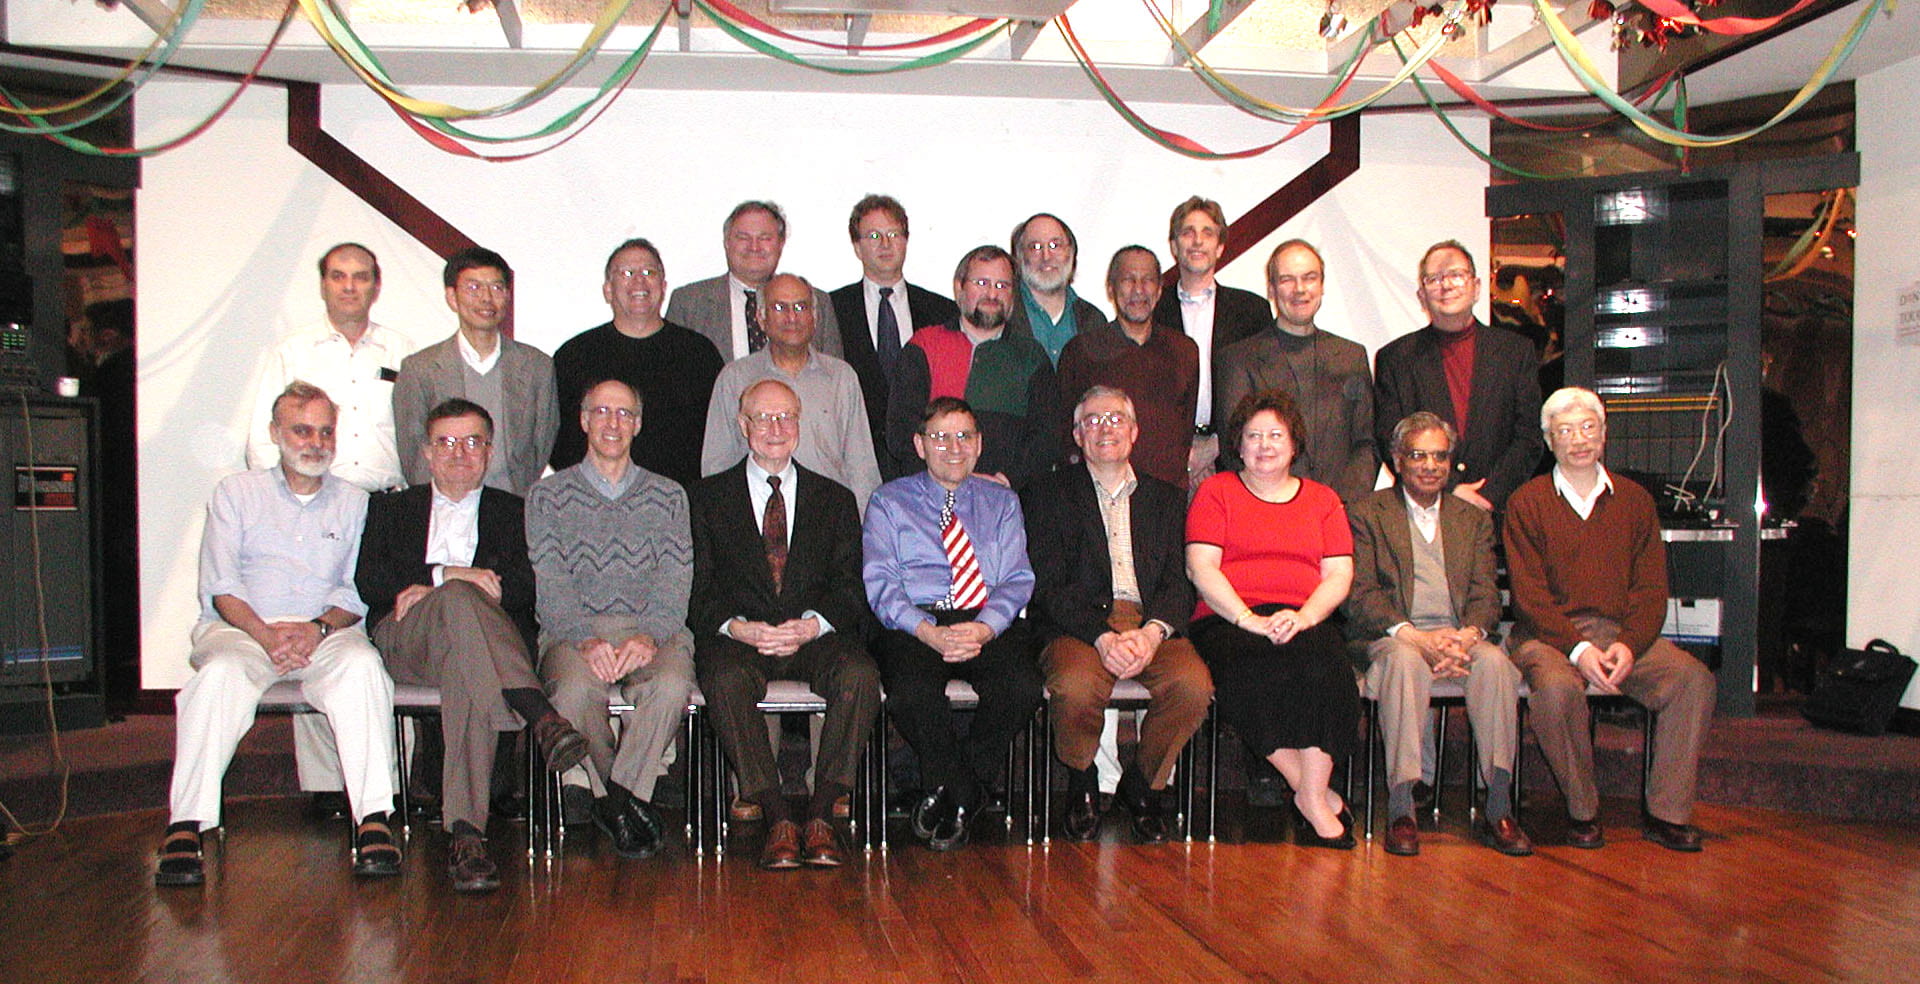 Group photo at LRR retirement